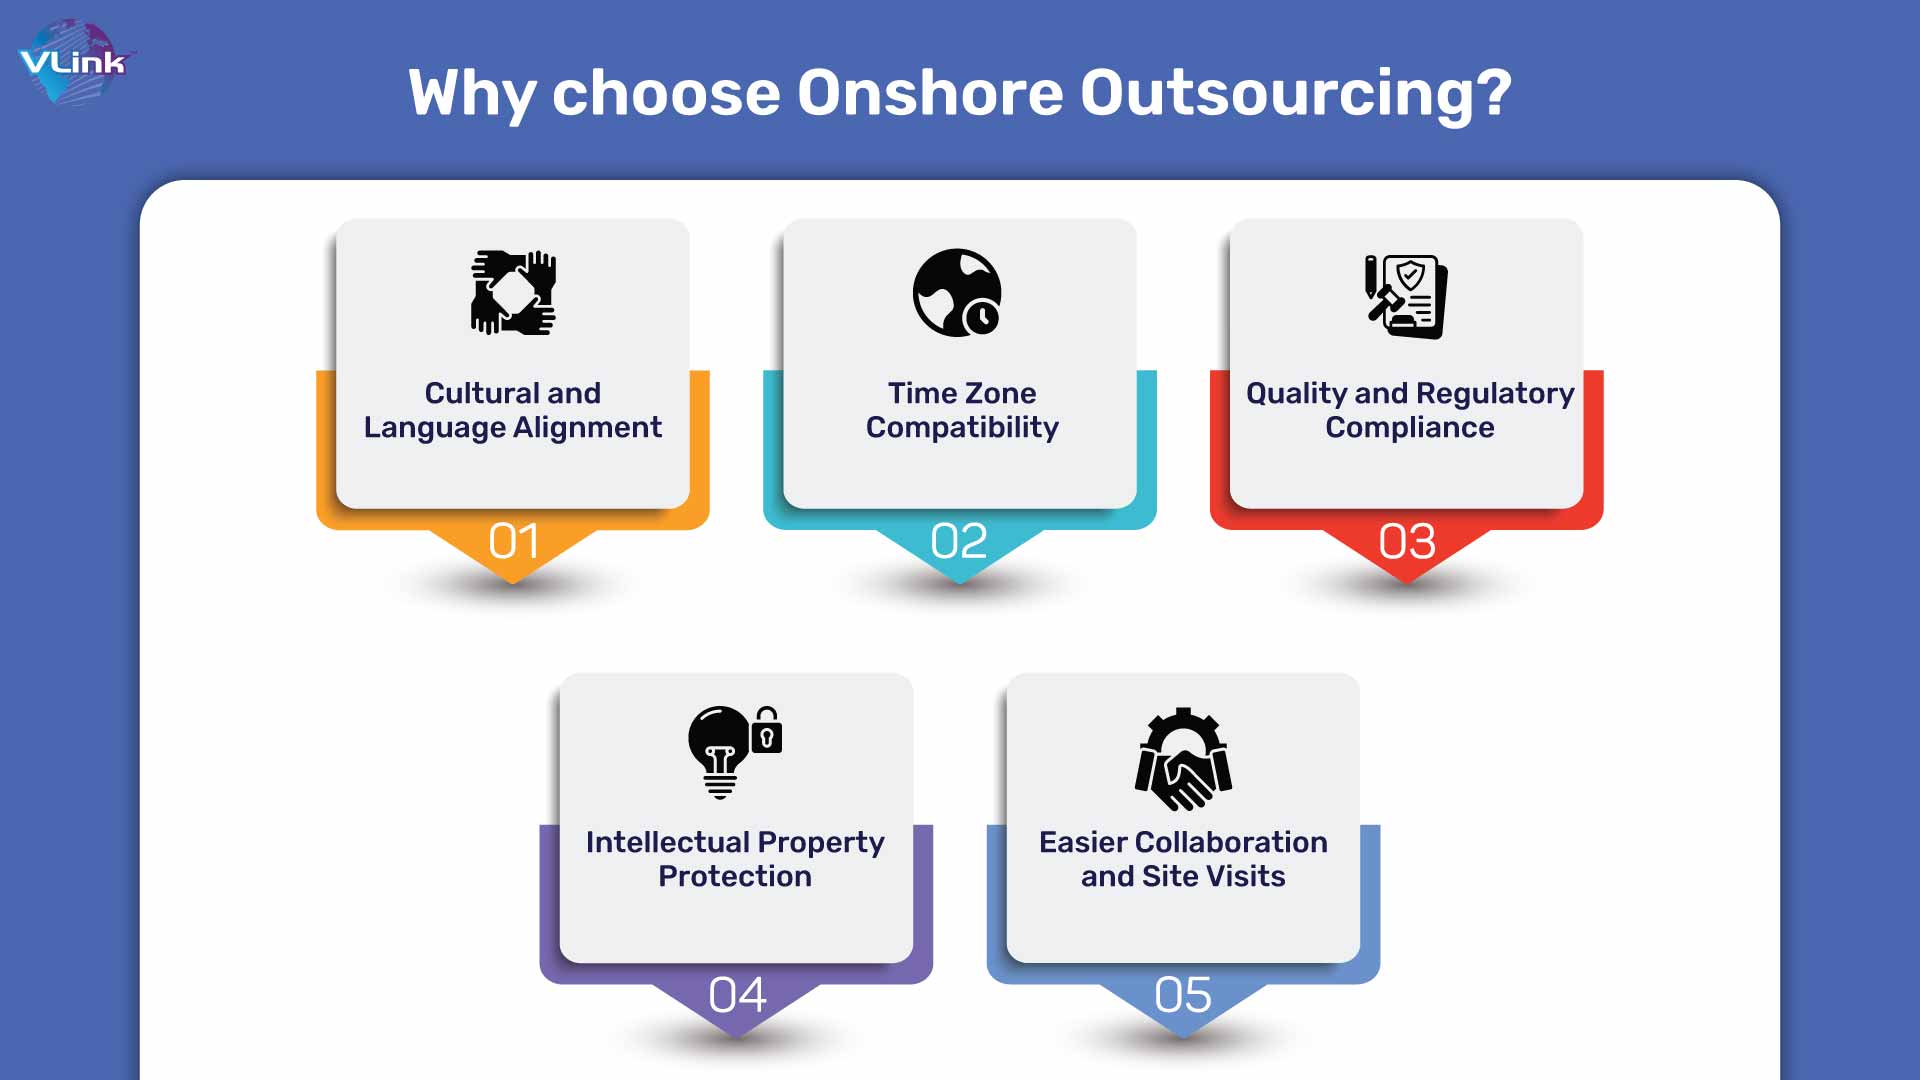 Why choose Onshore Outsourcing